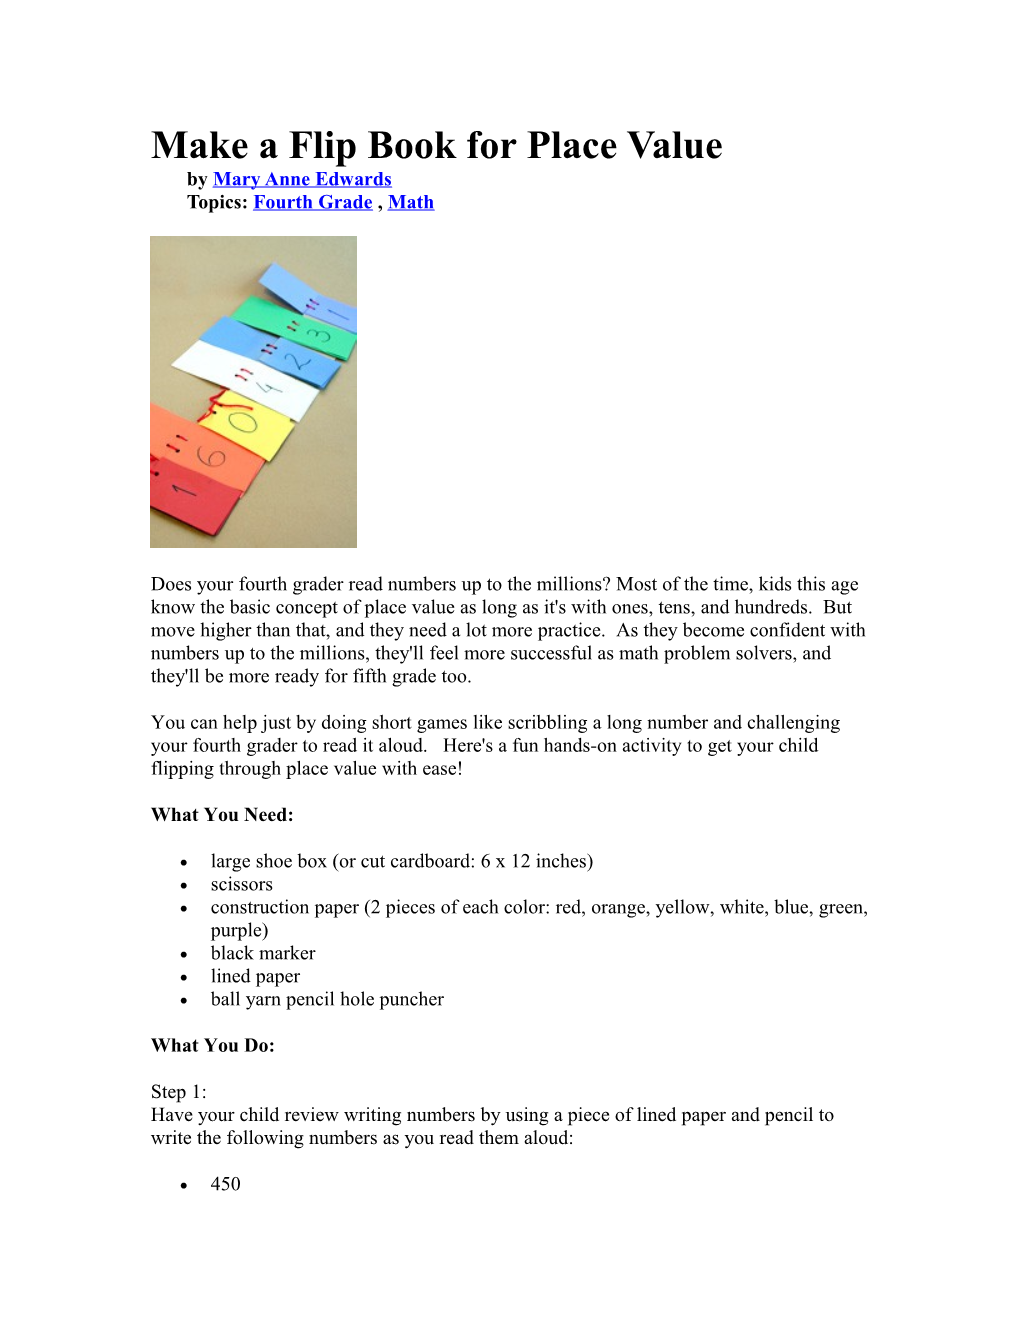 Make a Flip Book for Place Value